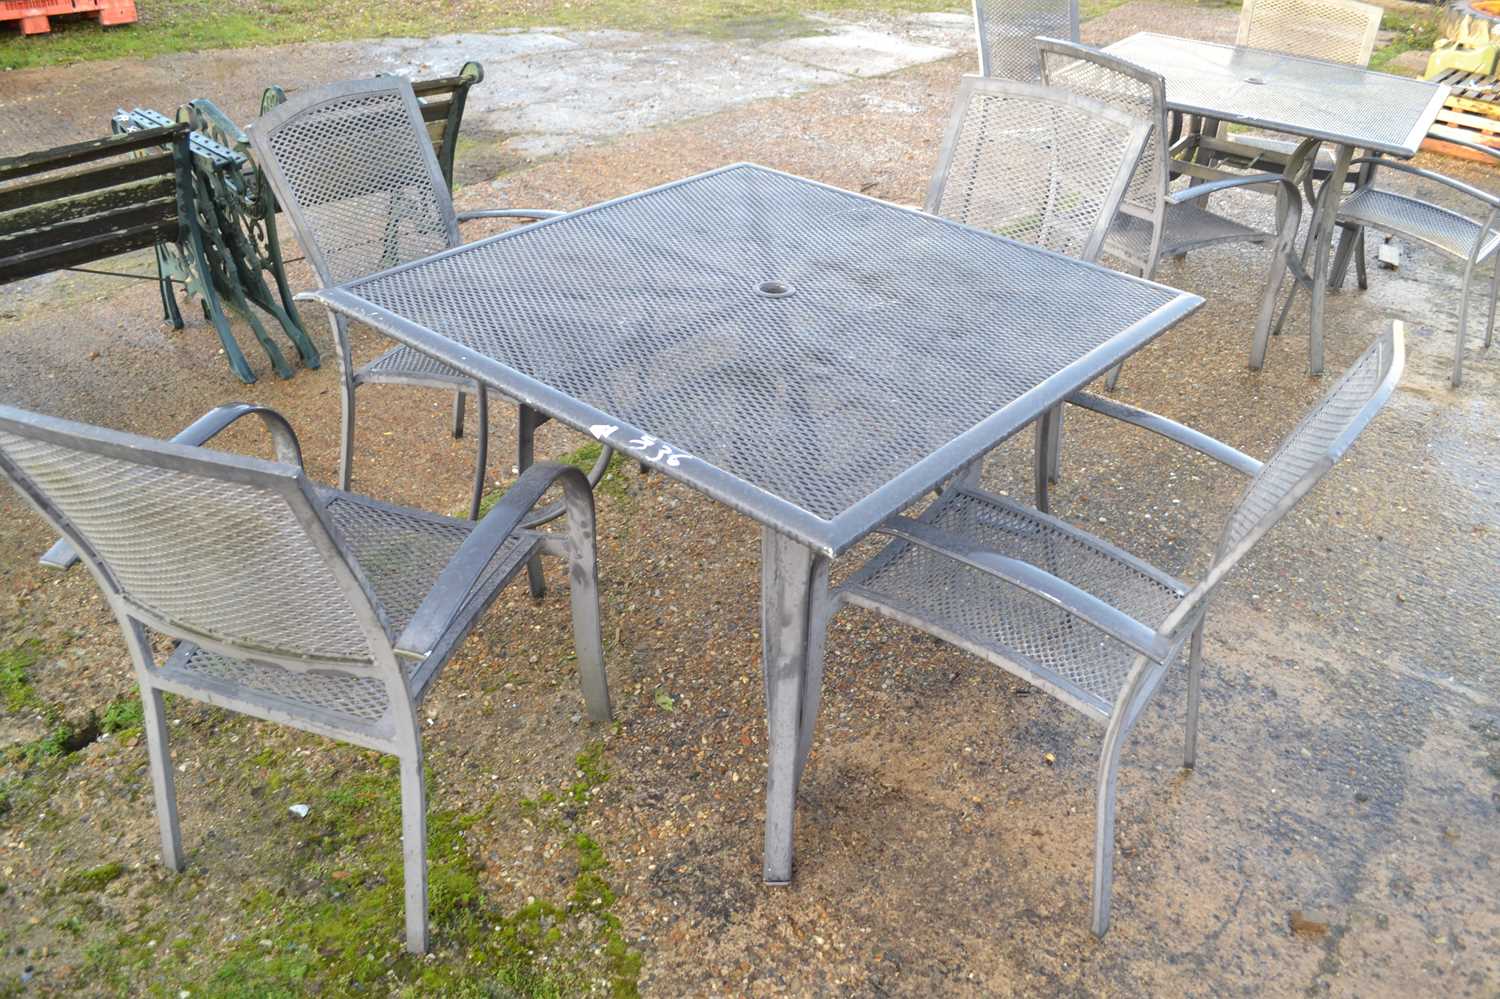 Four seater aluminium garden dining set to include table and four chairs, table height 72cm, table